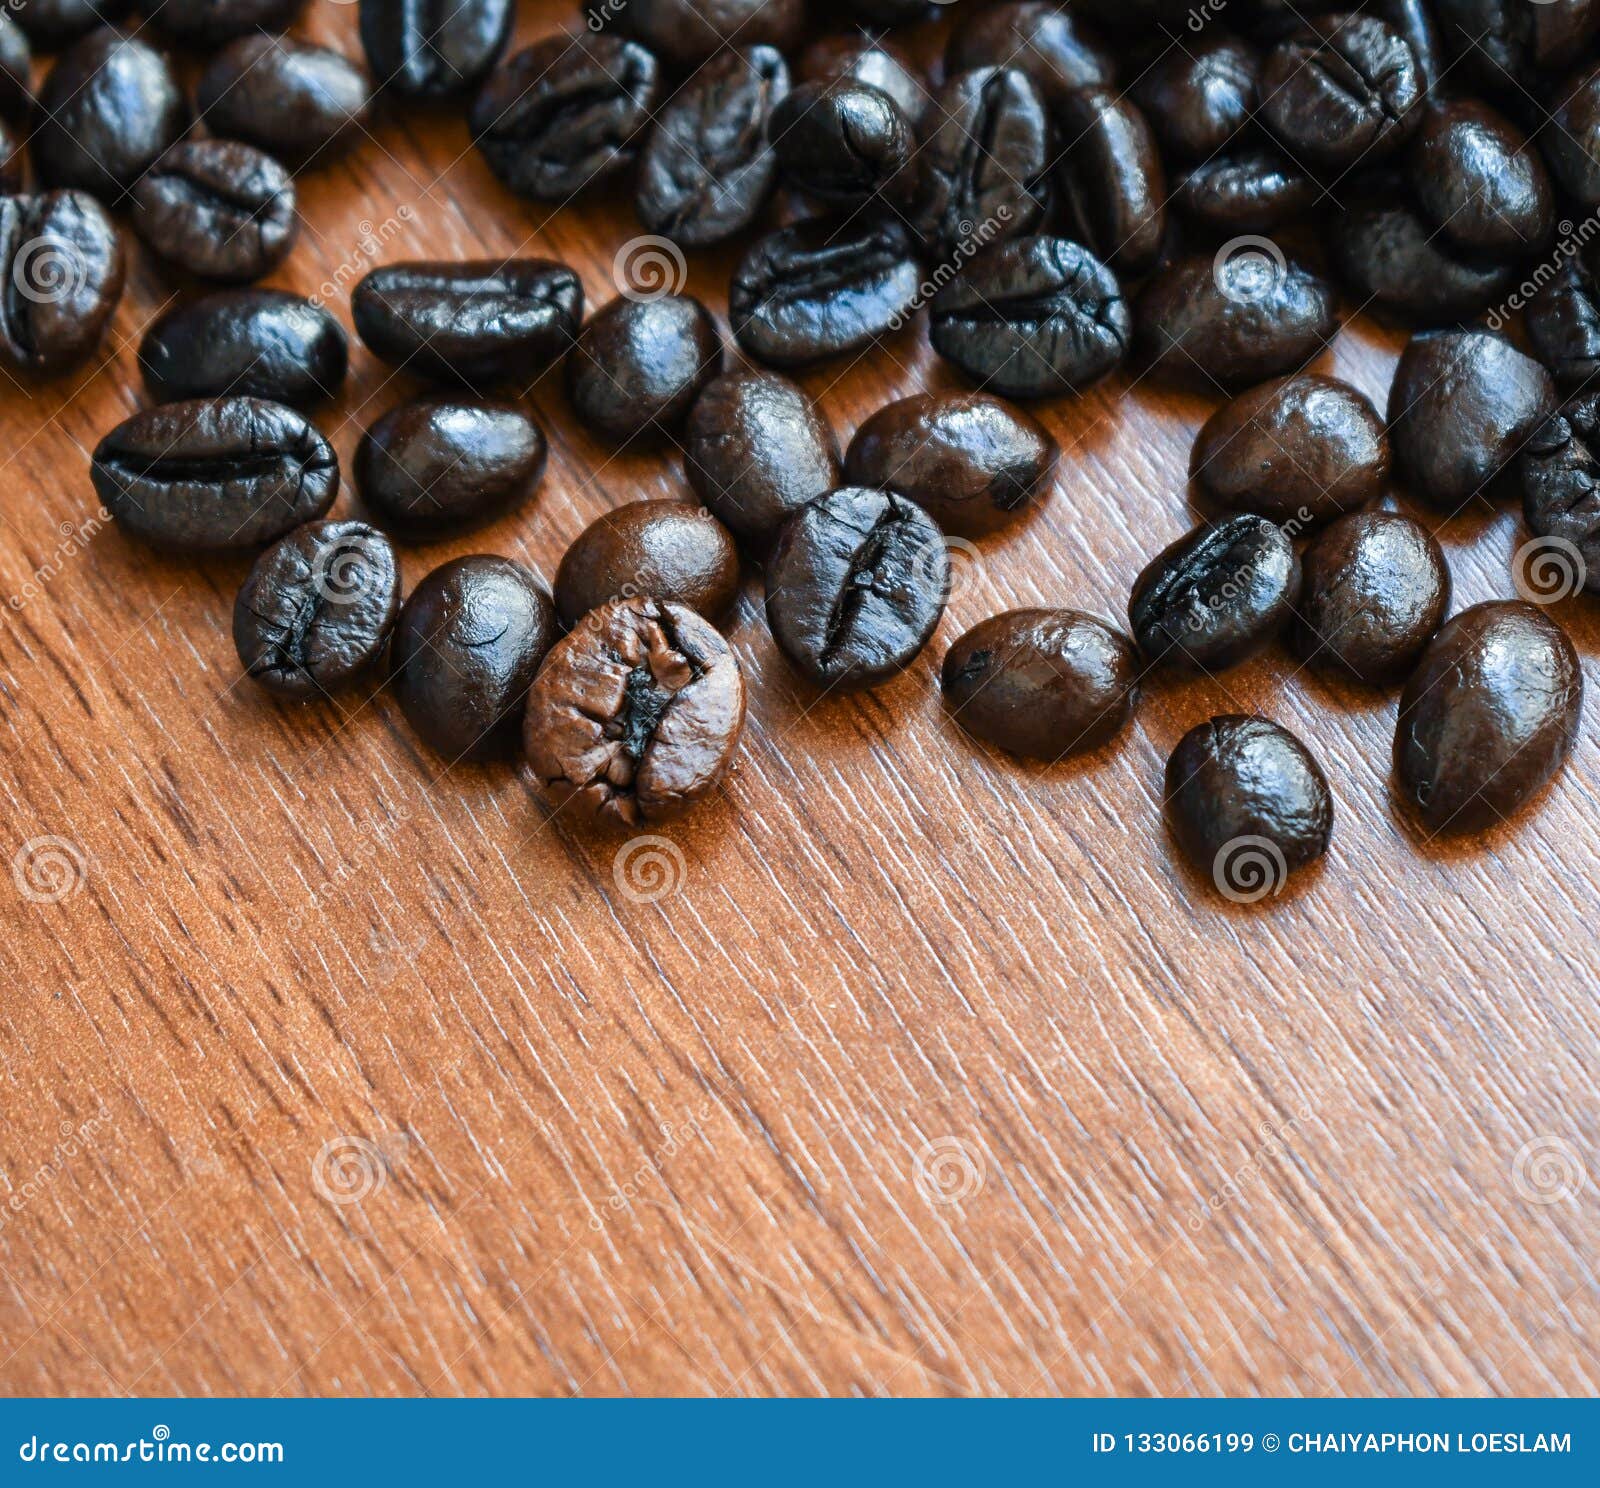 Roasted coffee beans stock image. Image of coffee, morning - 133066199